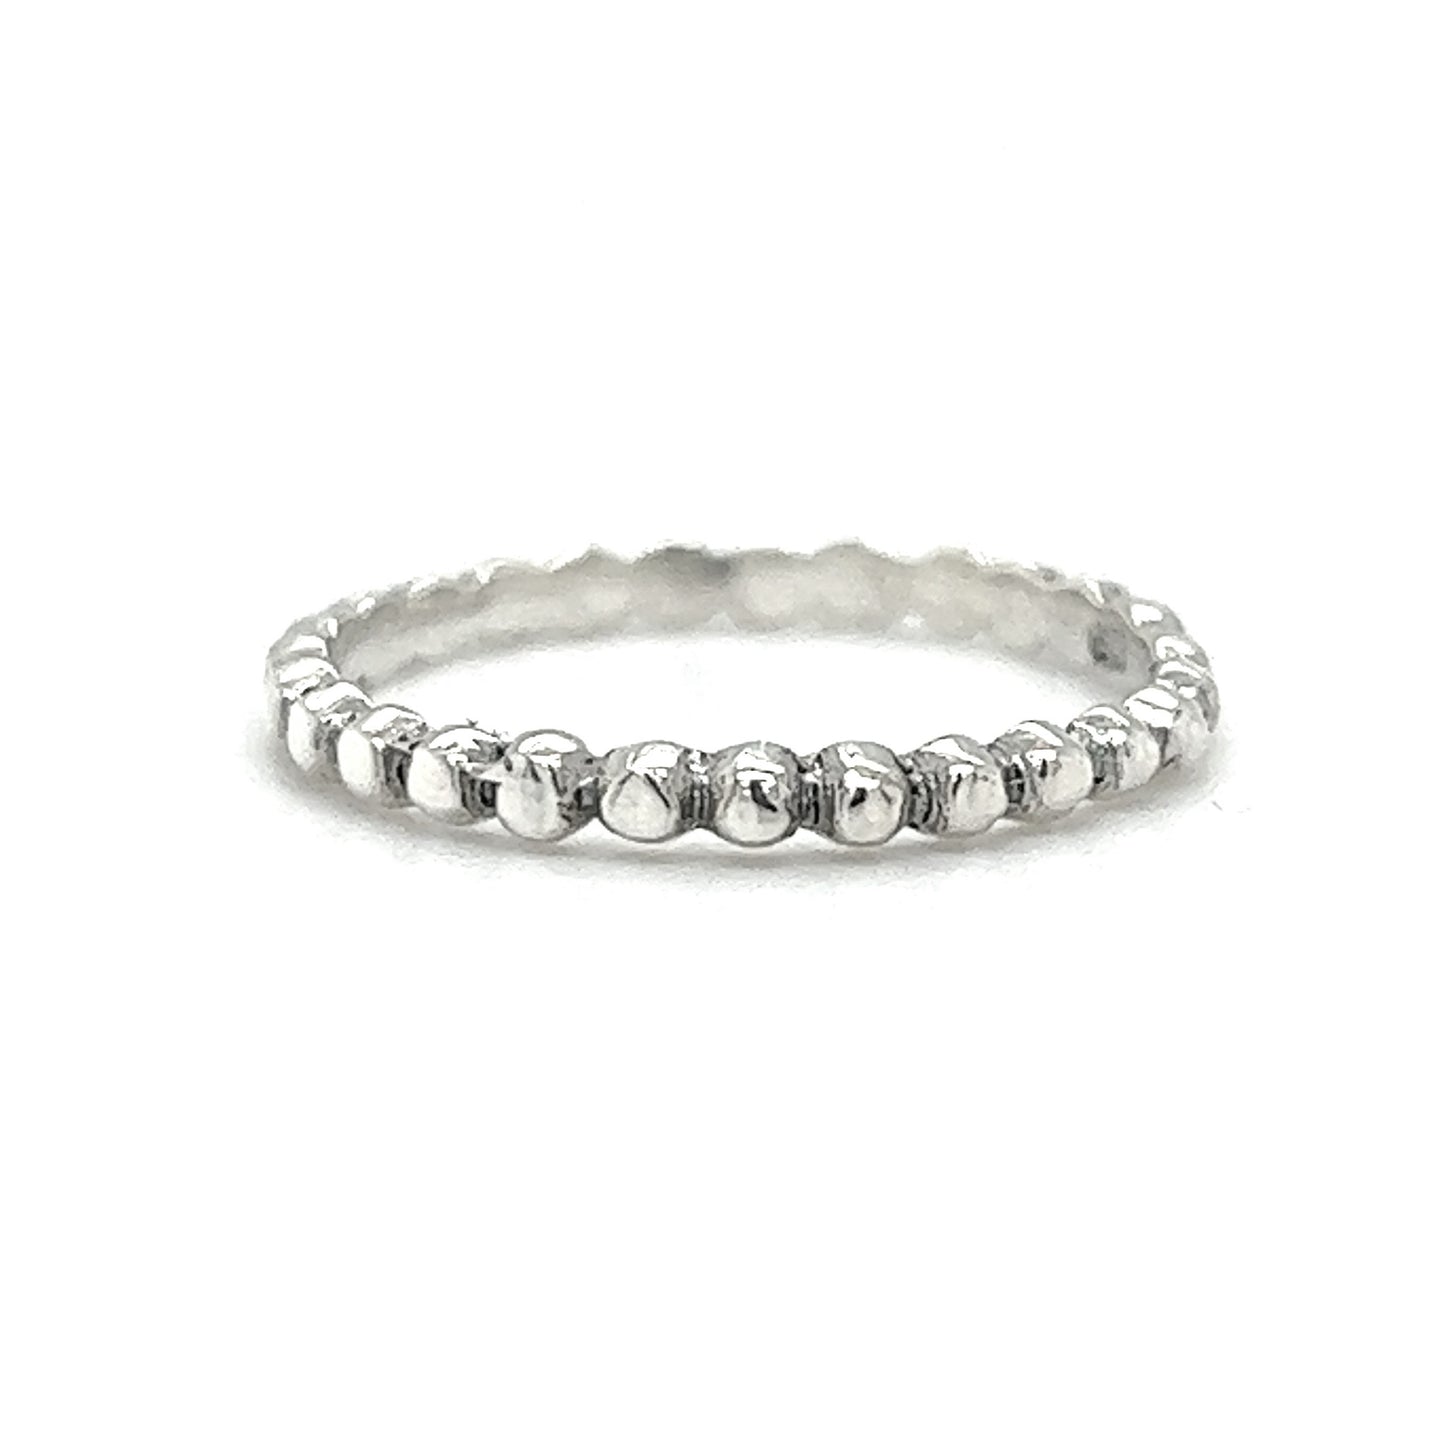 A delicate charm, Tiny Beaded Ring on a white background.